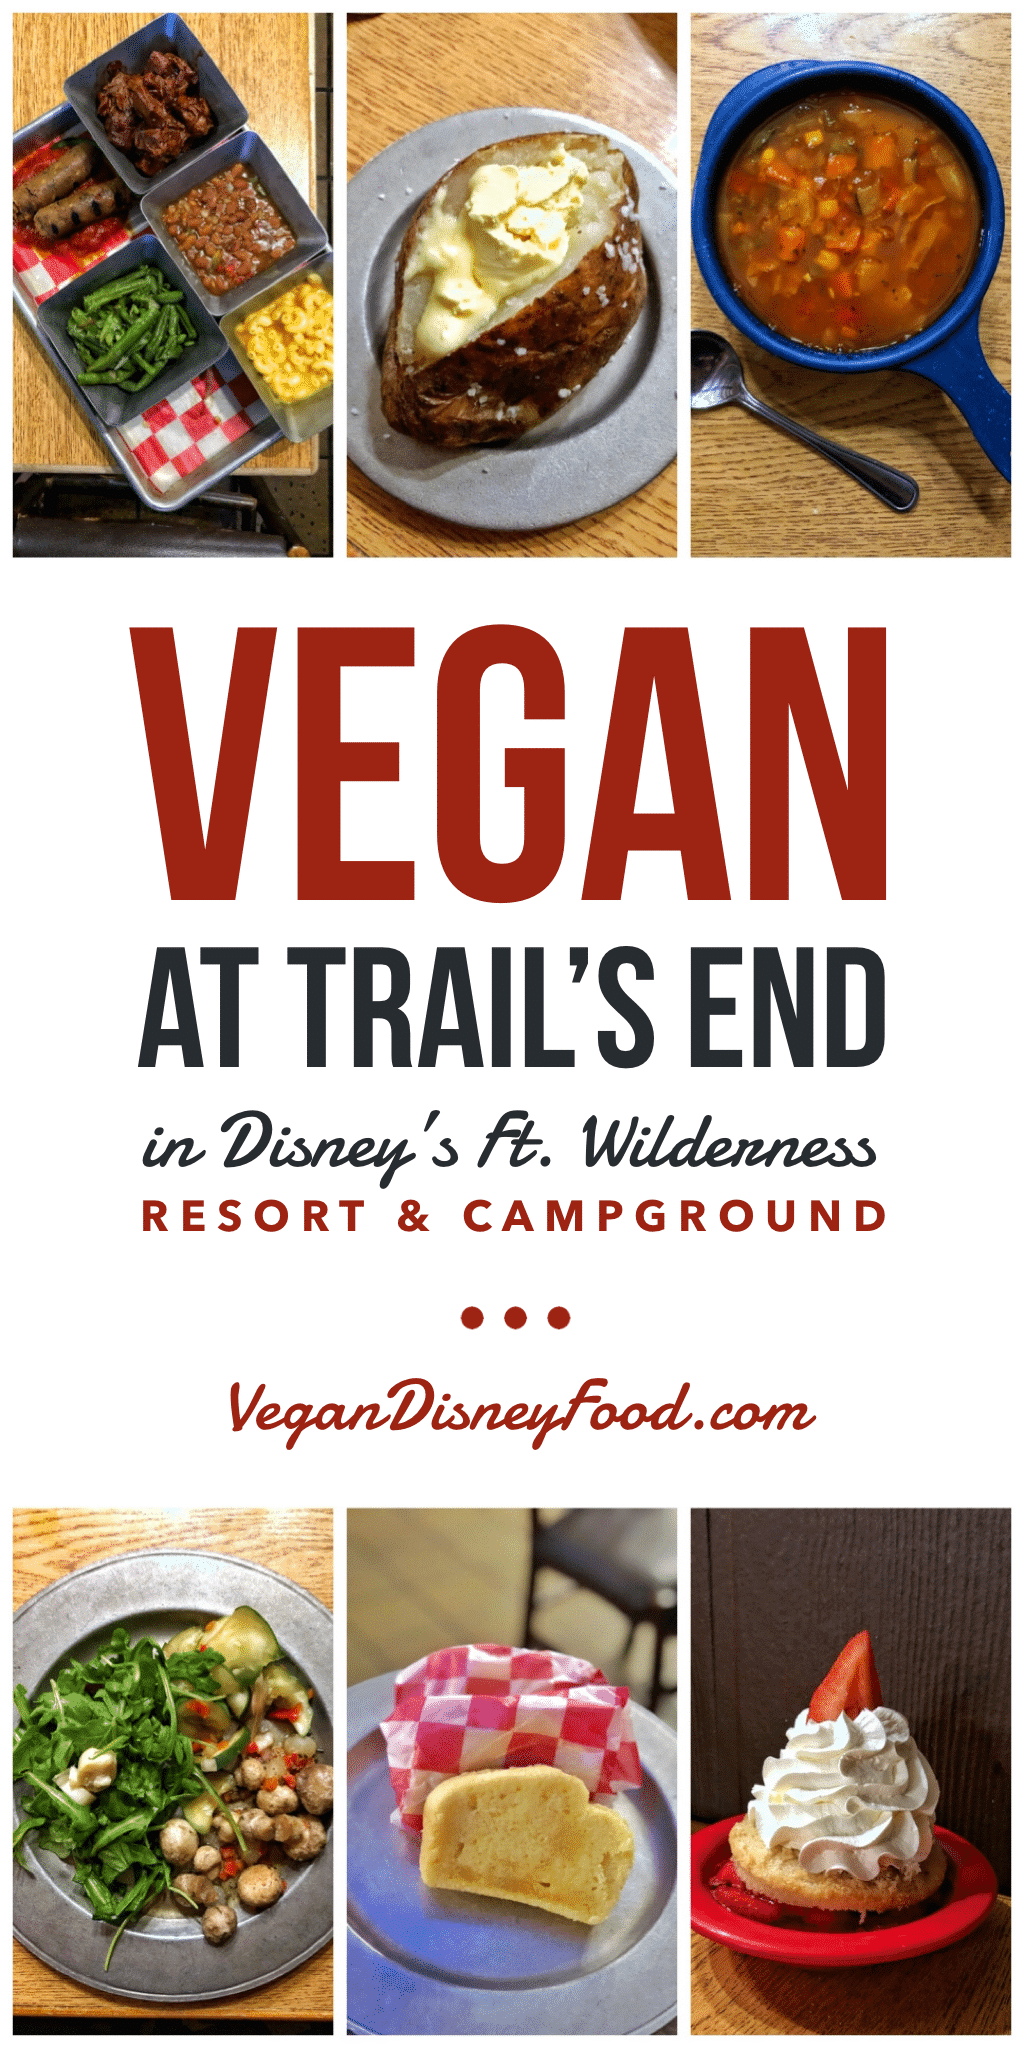 Vegan Dinner at Trails End at Disney’s Ft Wilderness Resort and Campground without Chef TJ